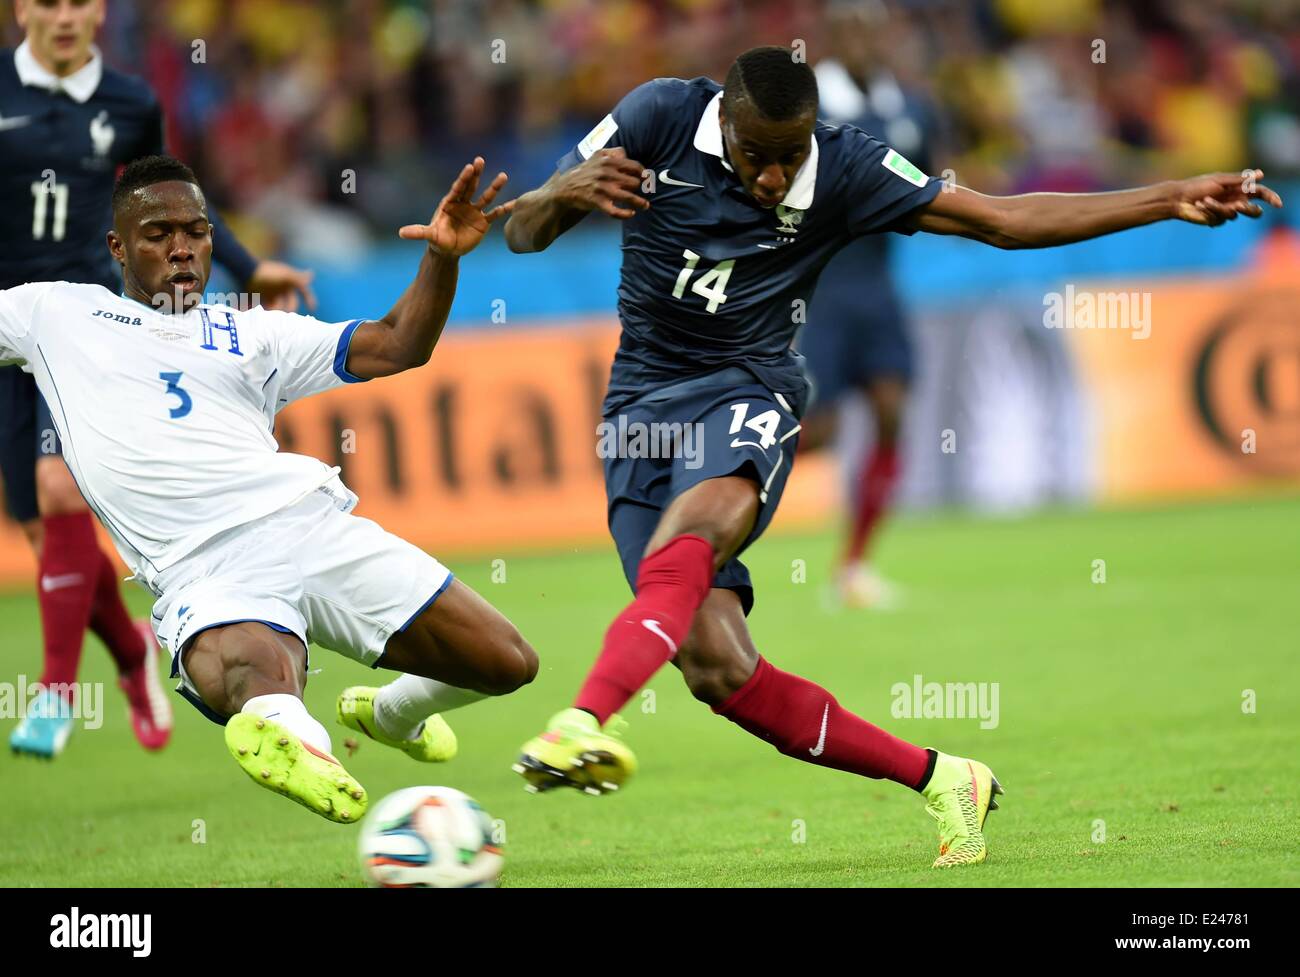 Porto Alegre, Brazil. 15th June, 2014. Frances Blaise Matuidi (R) challenges with Honduras Maynor Figueroa during a Group E match between France and Honduras of 2014 FIFA World Cup at the Estadio Beira-Rio Stadium in Porto Alegre, Brazil, June 15, 2014. (Xinhua/Li Ga)(pcy) (SP)BRAZIL-PORTO ALEGRE-WORLD CUP 2014-GROUP E-FRANCE VS HONDURAS Credit:  Action Plus Sports/Alamy Live News Stock Photo